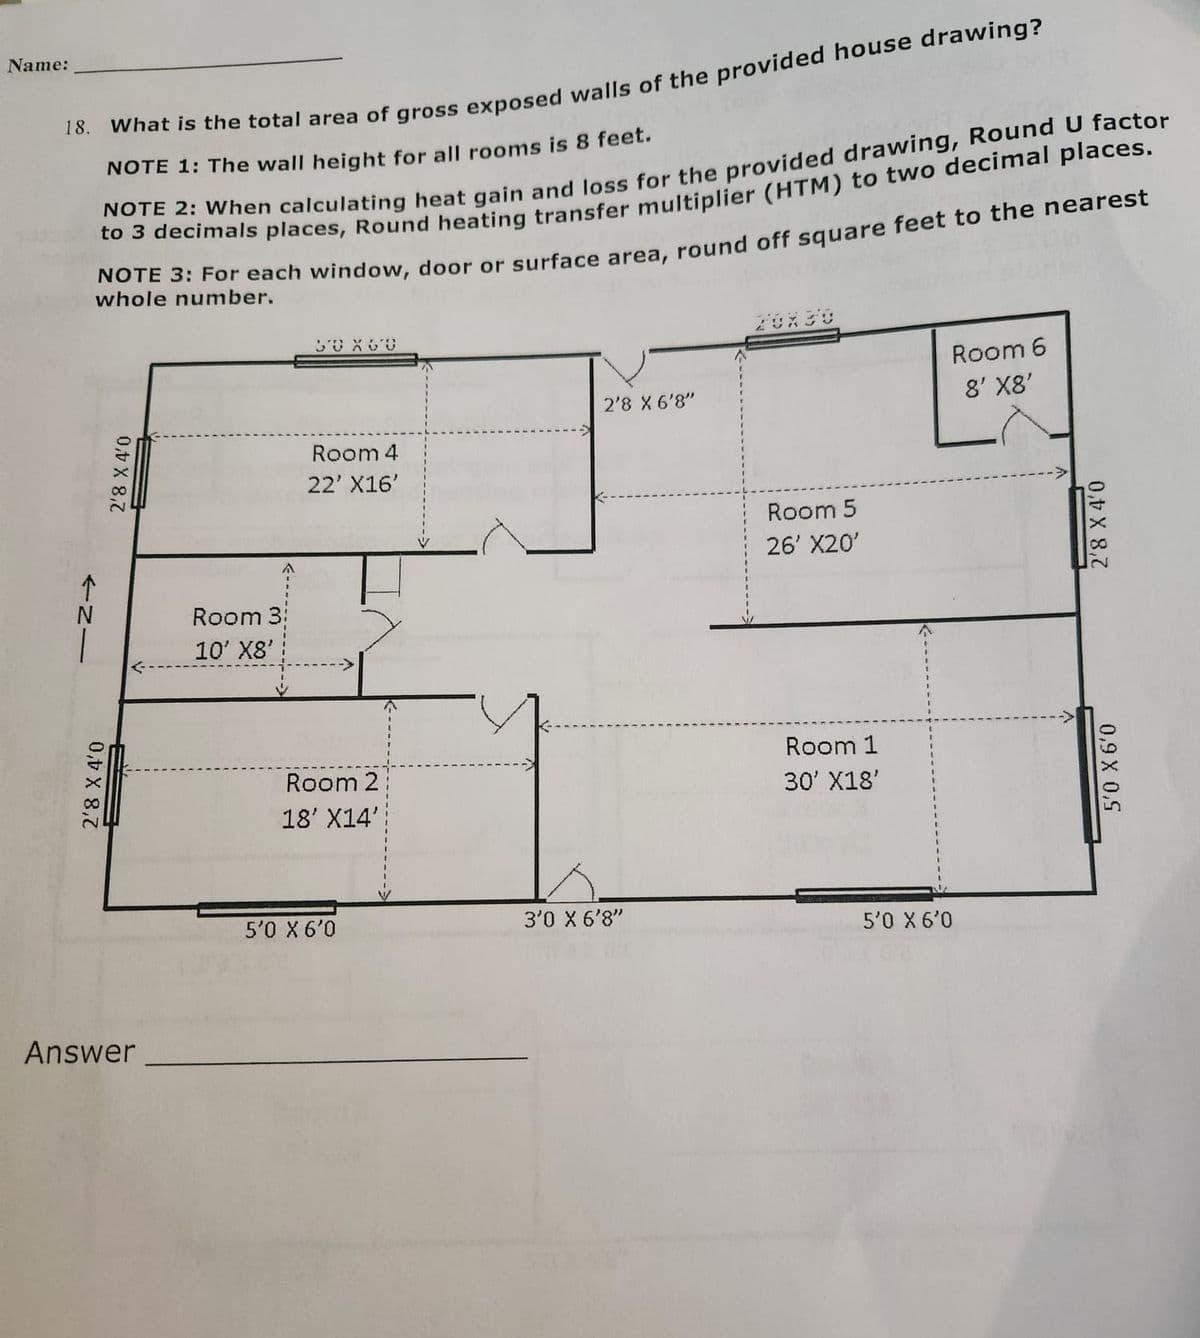 Name:
18. What is the total area of gross exposed walls of the provided house drawing?
NOTE 1: The wall height for all rooms is 8 feet.
NOTE 2: When calculating heat gain and loss for the provided drawing, Round U factor
to 3 decimals places, Round heating transfer multiplier (HTM) to two decimal places.
NOTE 3: For each window, door or surface area, round off square feet to the nearest
whole number.
个N|
2'8 X 4'0
2'8 X 4'0
Answer
Room 3:
10' X8'
50 X 60
Room 4
22' X16'
Room 2
18' X14'
5'0 X 6'0
2'8 X 6'8"
3'0 X 6'8"
Room 5
26' X20'
Room 1
30' X18'
Room 6
8' X8'
5'0 X 6'0
2'8 X 4'0
5'0 X 6'0